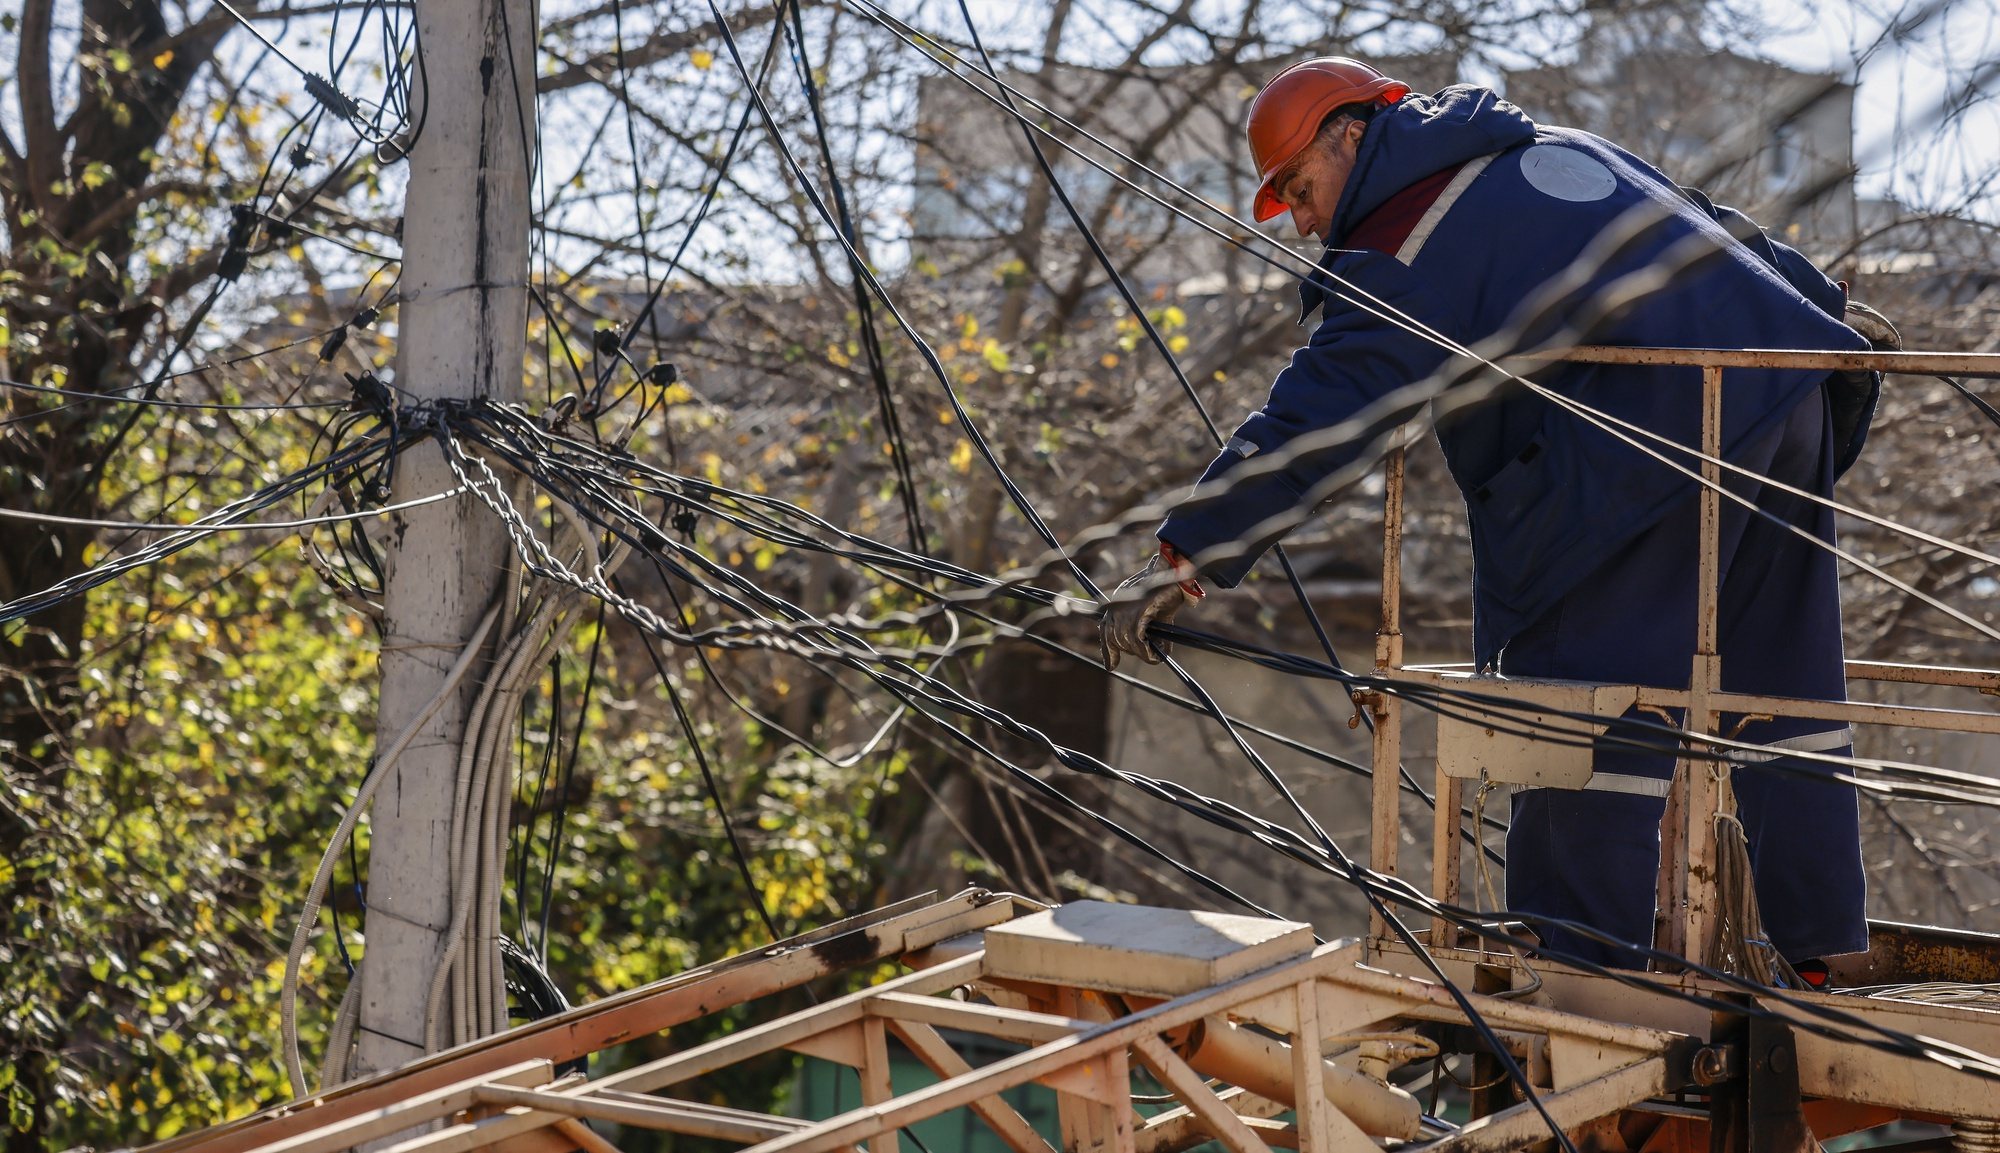 epa10278710 A worker repairs powerlines in Mykolaiv, Ukraine, 01 November 2022. Four missiles hit the city area the night before. Russian troops on 24 February entered Ukrainian territory, starting a conflict that has provoked destruction and a humanitarian crisis.  EPA/HANNIBAL HANSCHKE